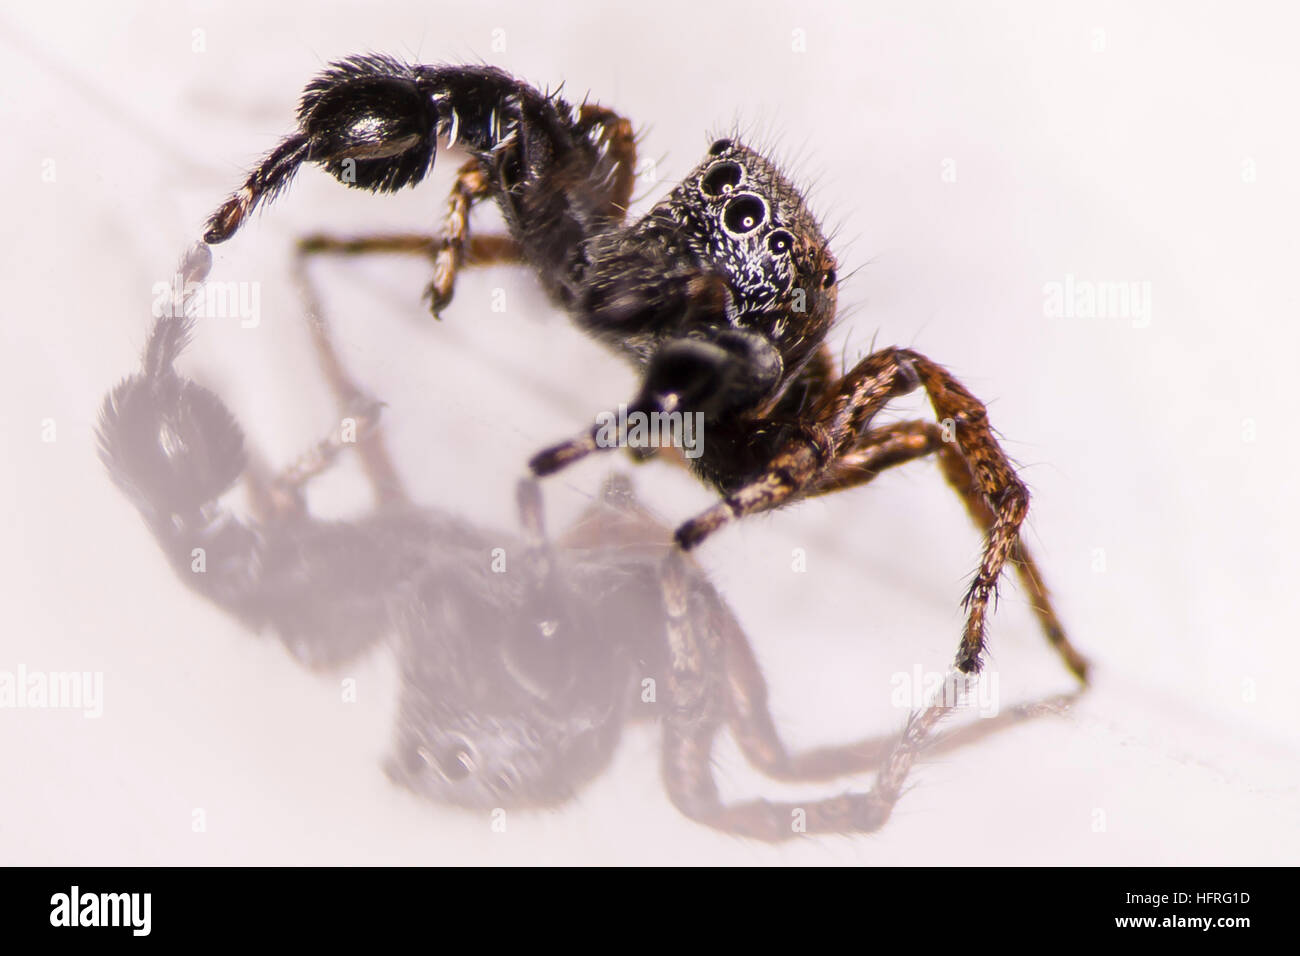 Close-up of a male Habronattus oregonensis (a jumping spider).  The characteristic swollen tibia are apparent. Photographed on a white background. Stock Photo